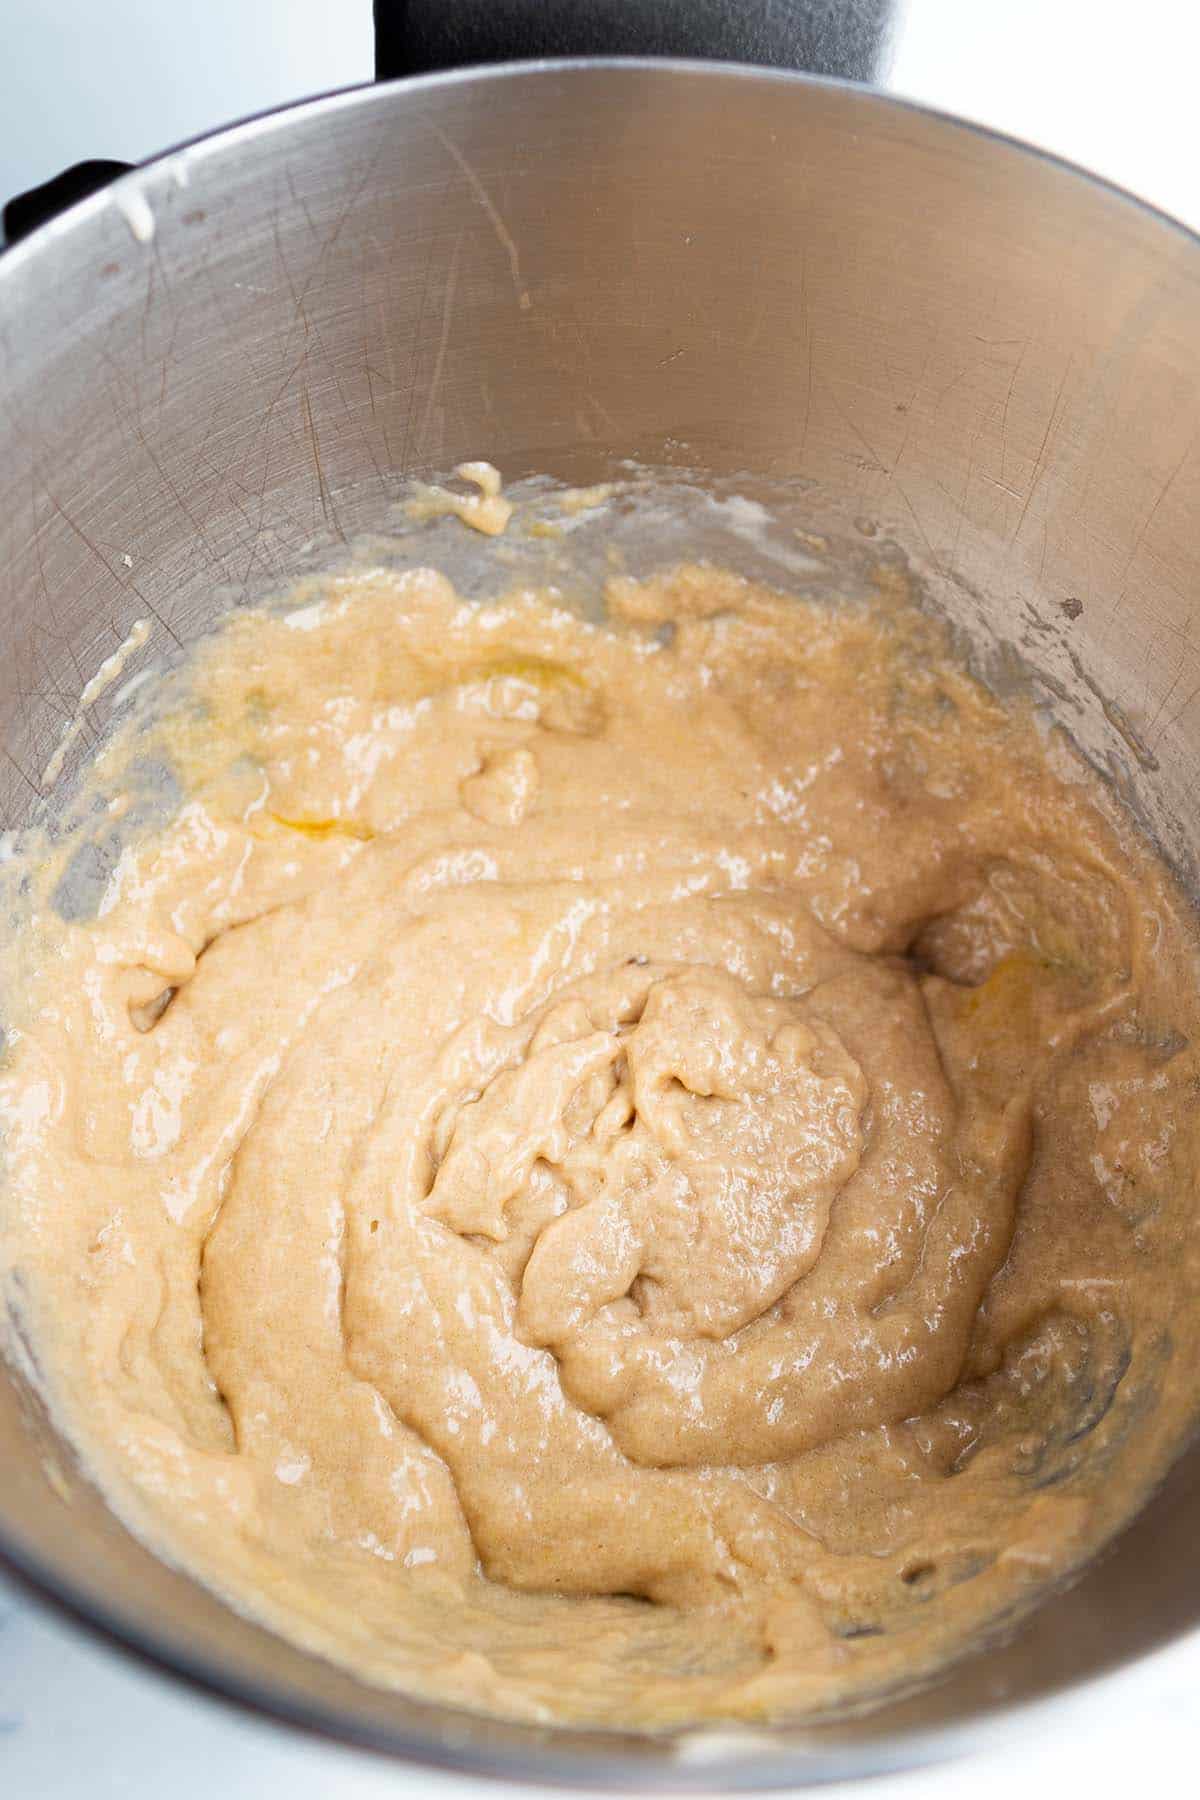 Cookie batter inside a bowl of a stand mixer.